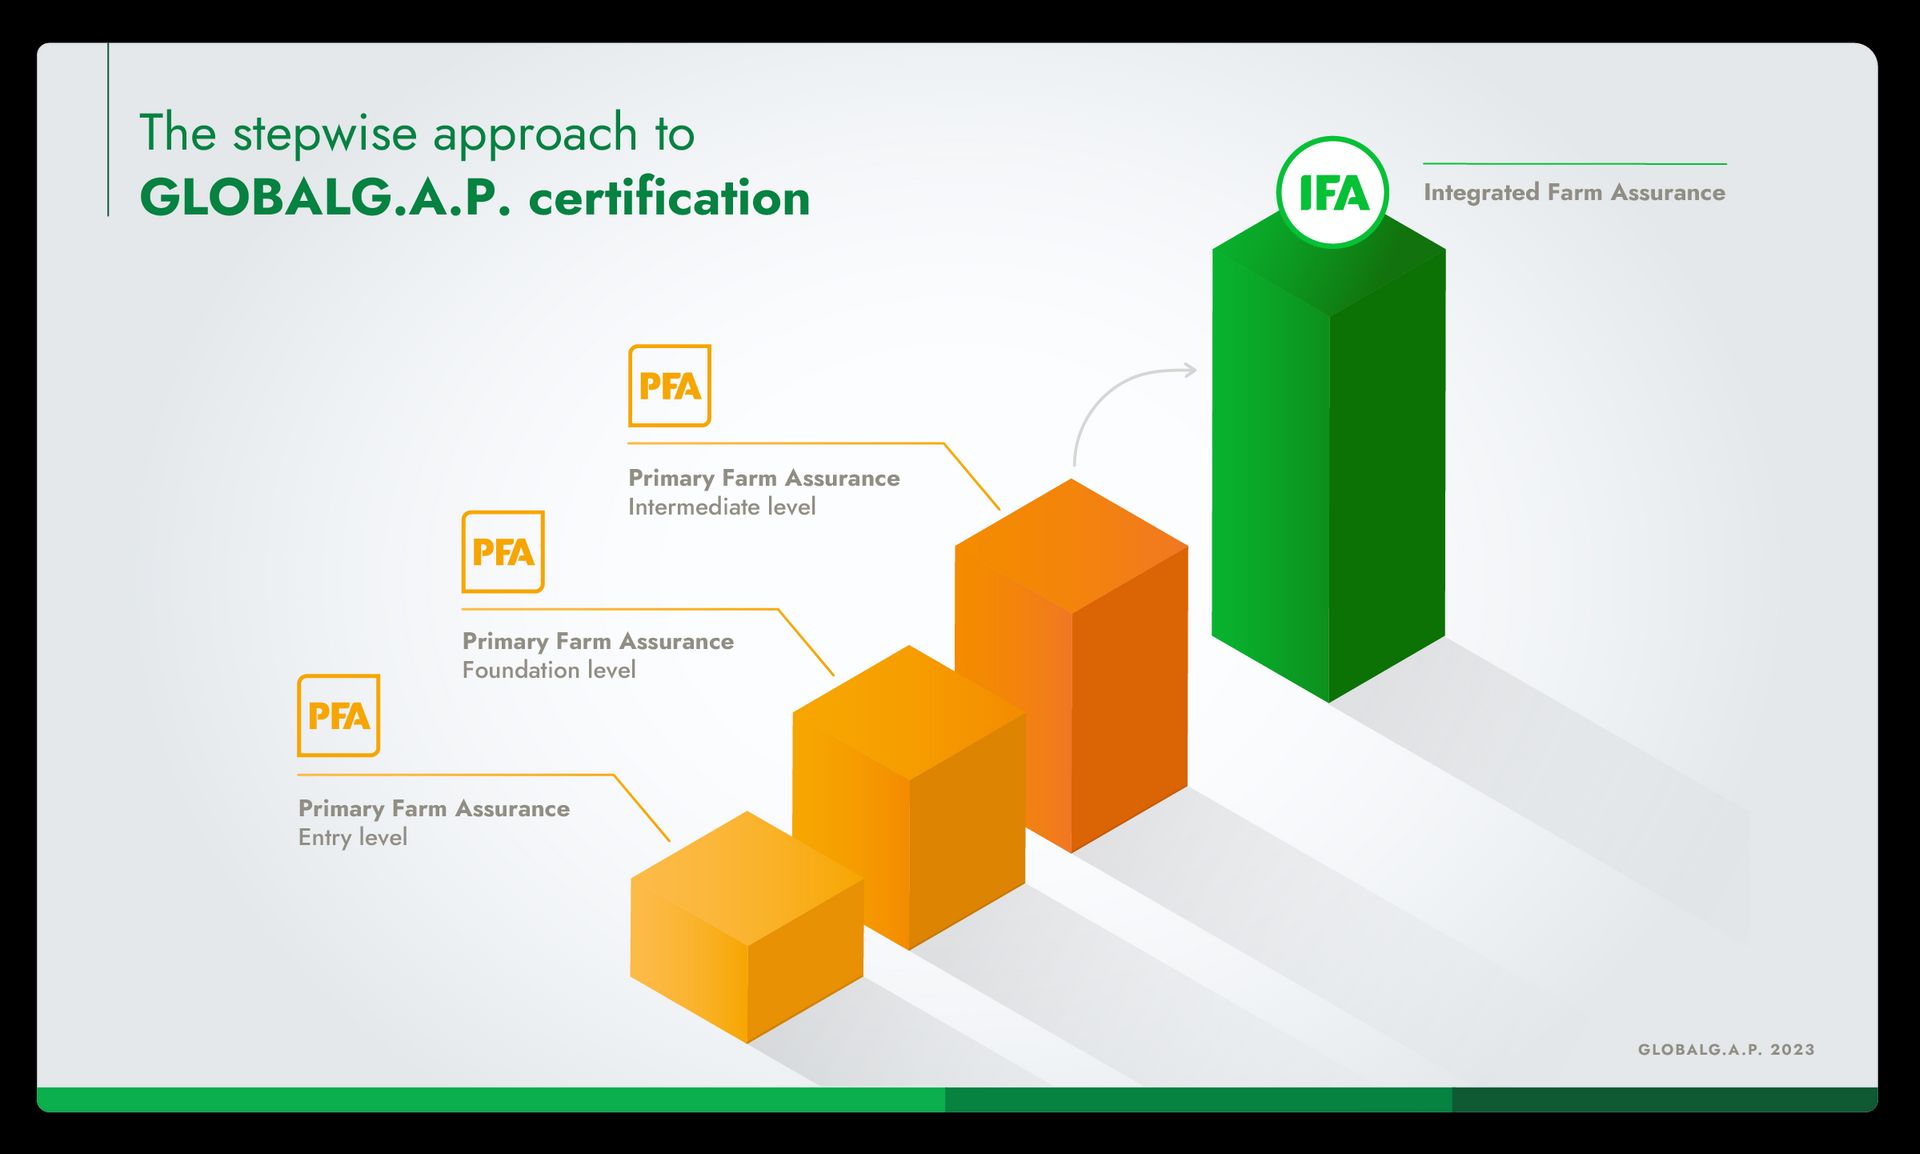 Infographic showing the stepwise approach of GLOBALG.A.P. Primary Farm Assurance